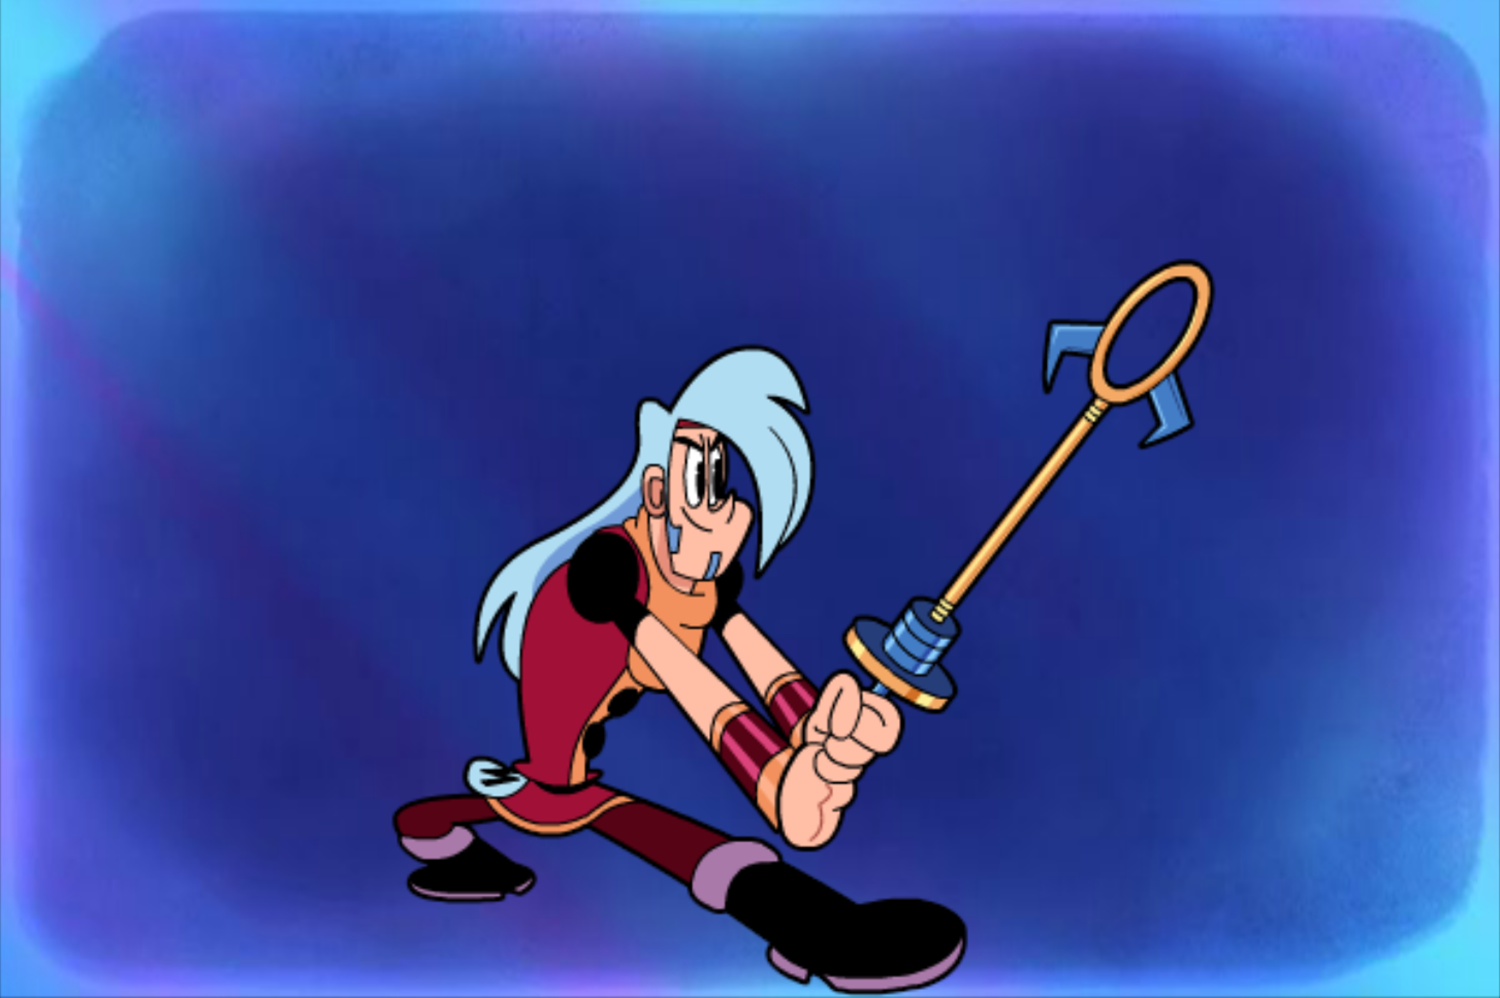 Mighty MagiSwords Hoversword Hustle Game Exploding Bubble Magisword Intro Screenshot.